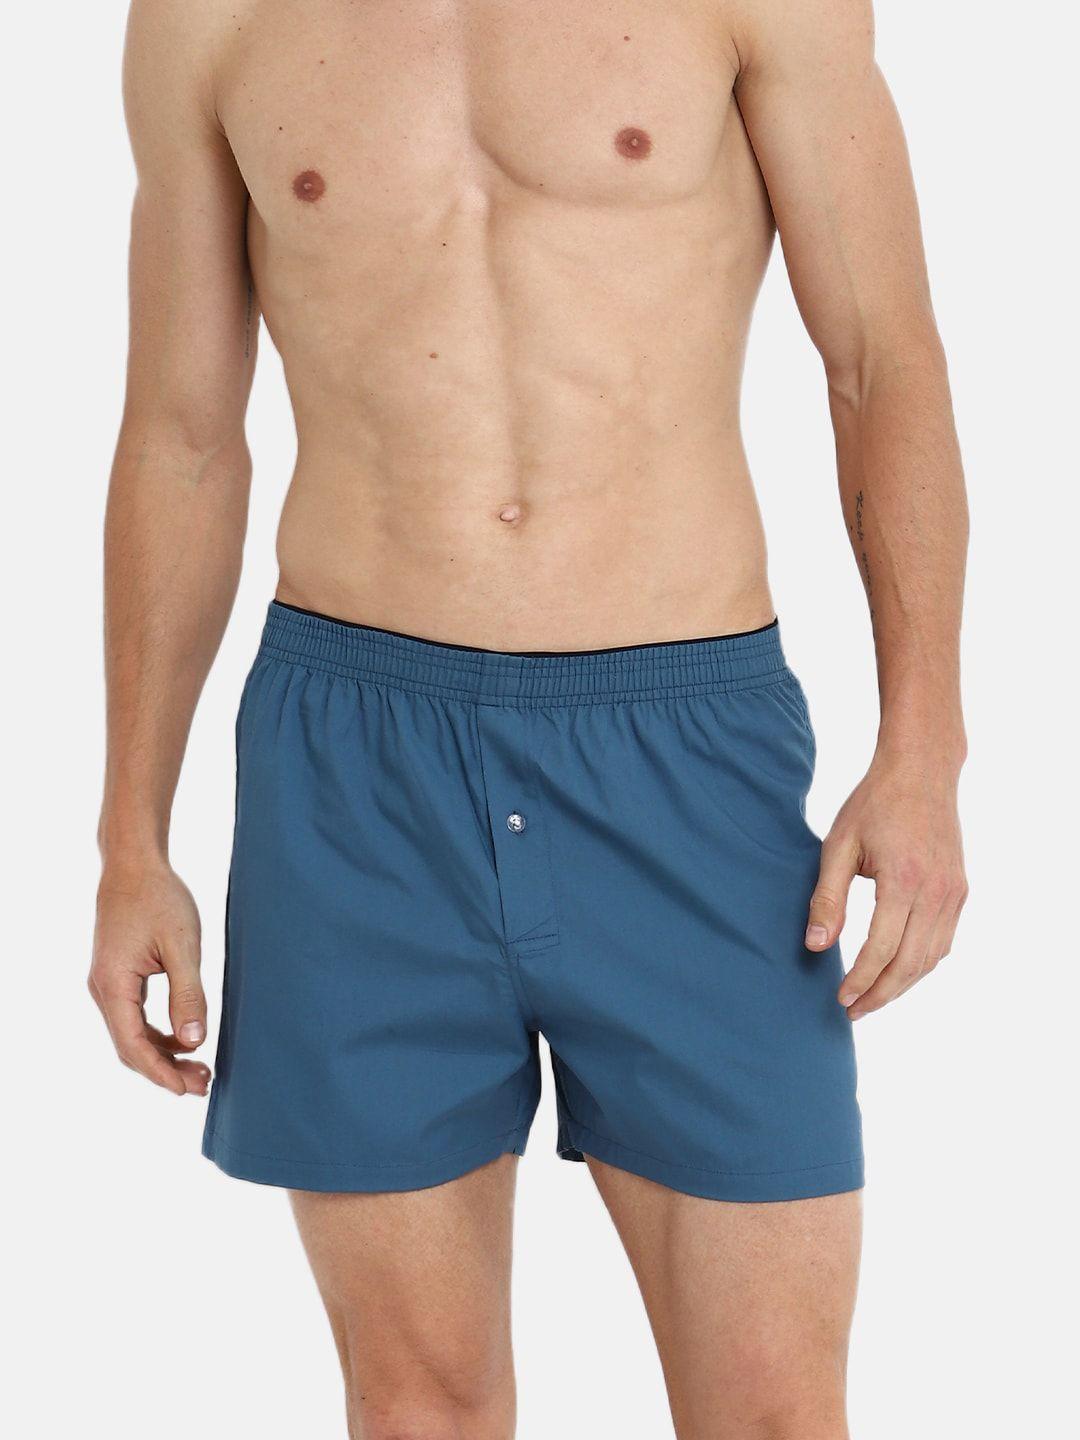 almo-wear-men-teal-blue-solid-pure-cotton-boxers-b002-s-124